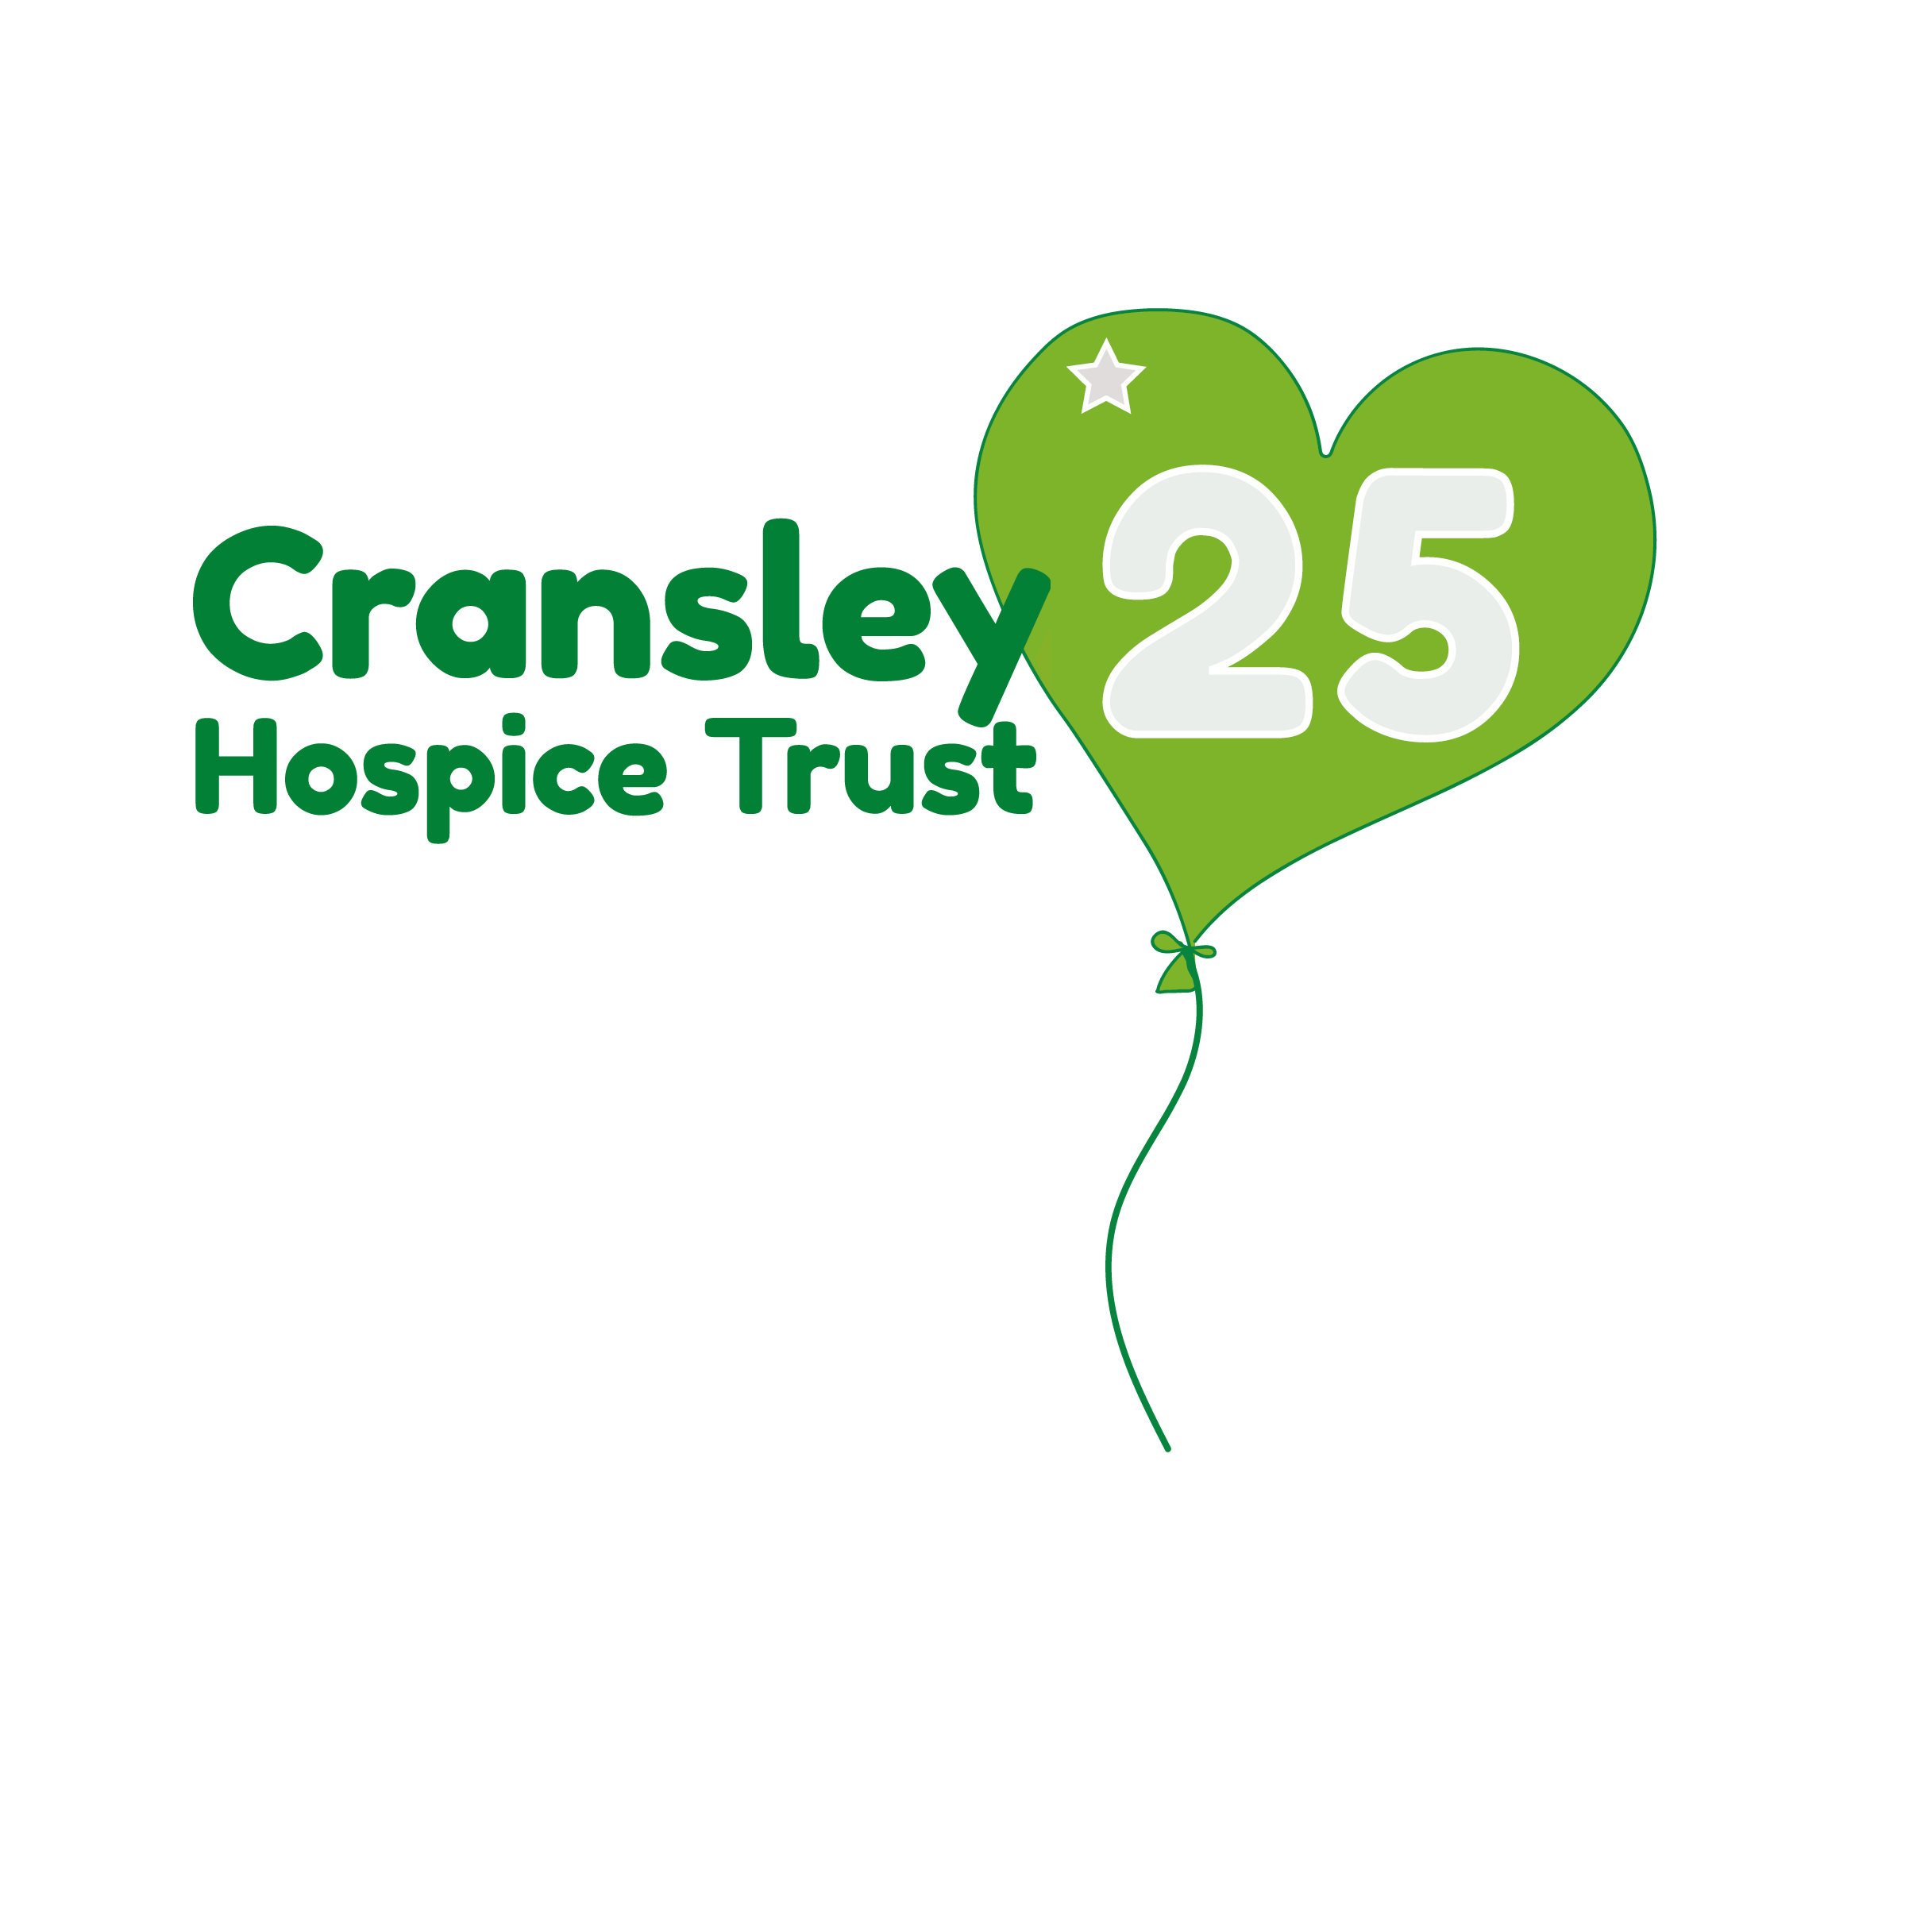 Cransley Hospice Trust bid farewell two valued Trustee volunteers welcome new members to Board | Northamptonshire Chamber